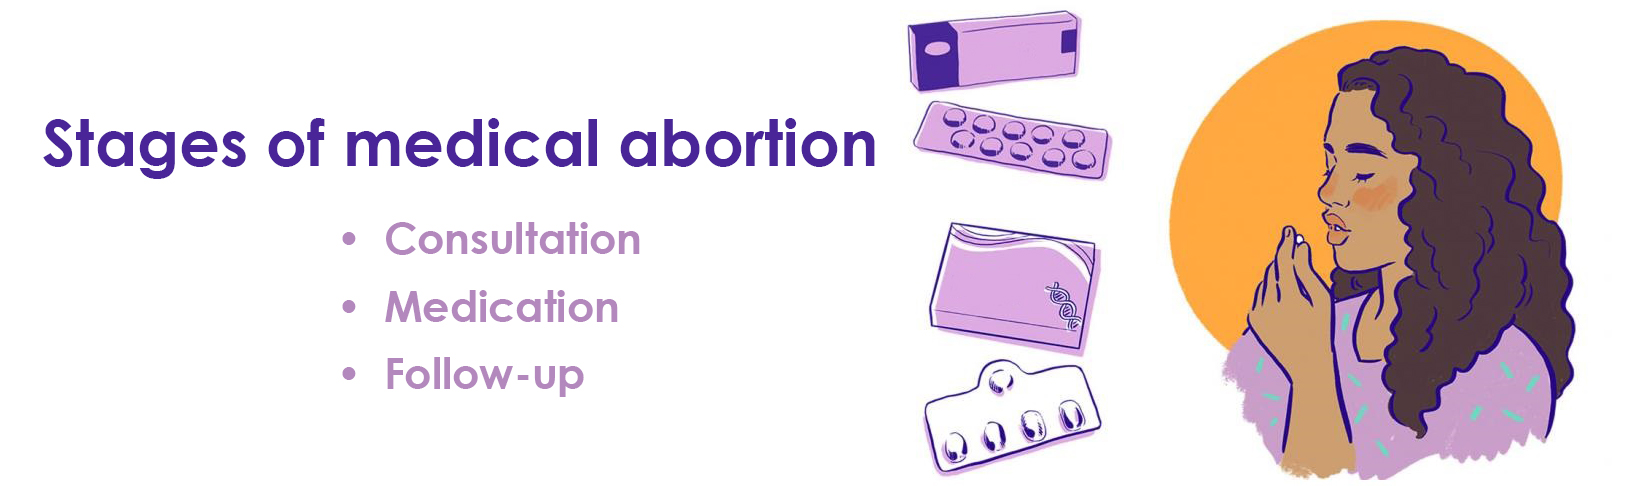 Stages of medical abortion in Kiev